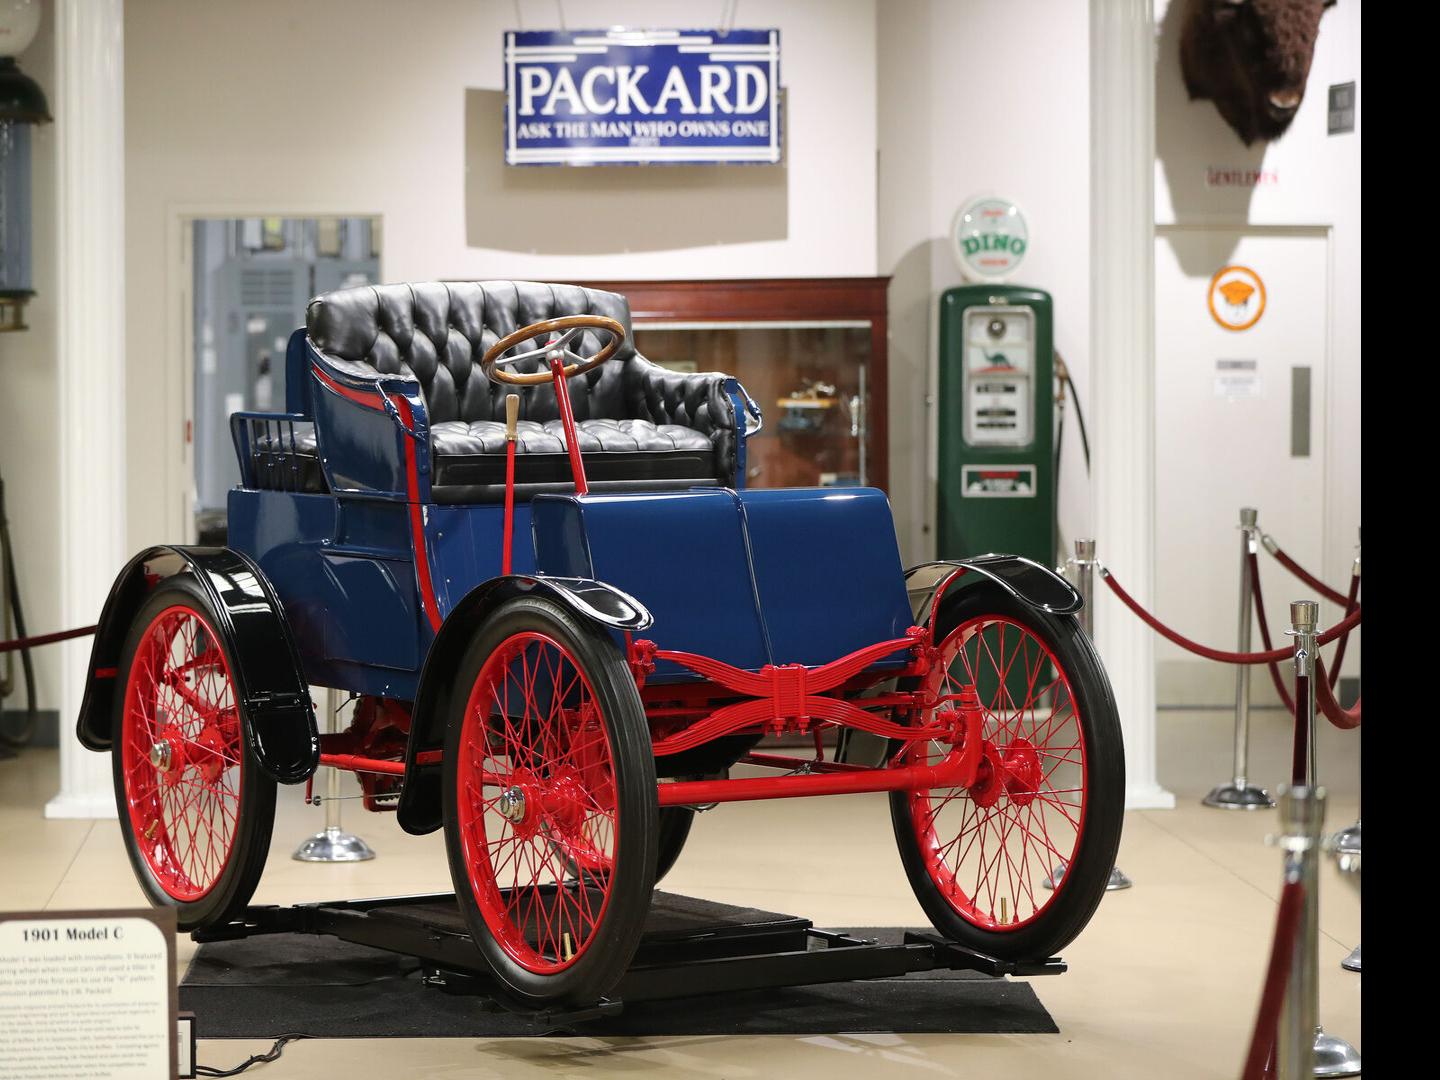 After 120 years, 1901 Packard rolls back into | Local News | buffalonews.com